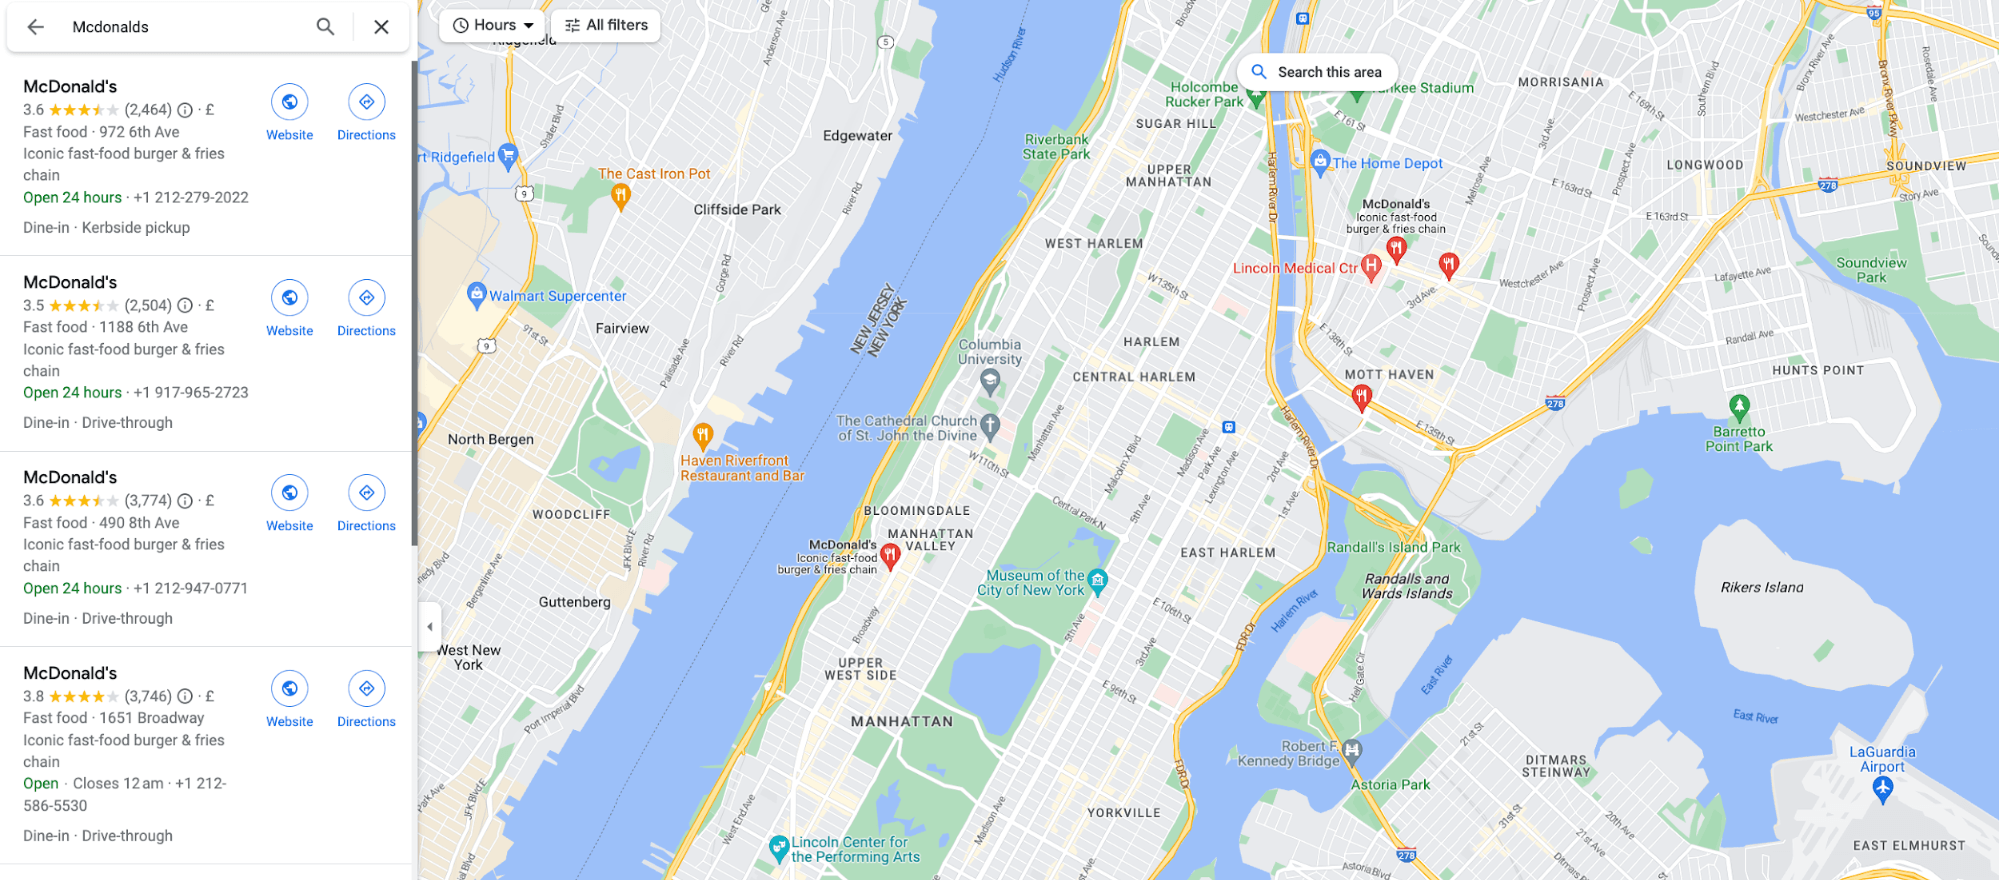 a google map search for “mcdonald’s” showing local restaurants and their review rating